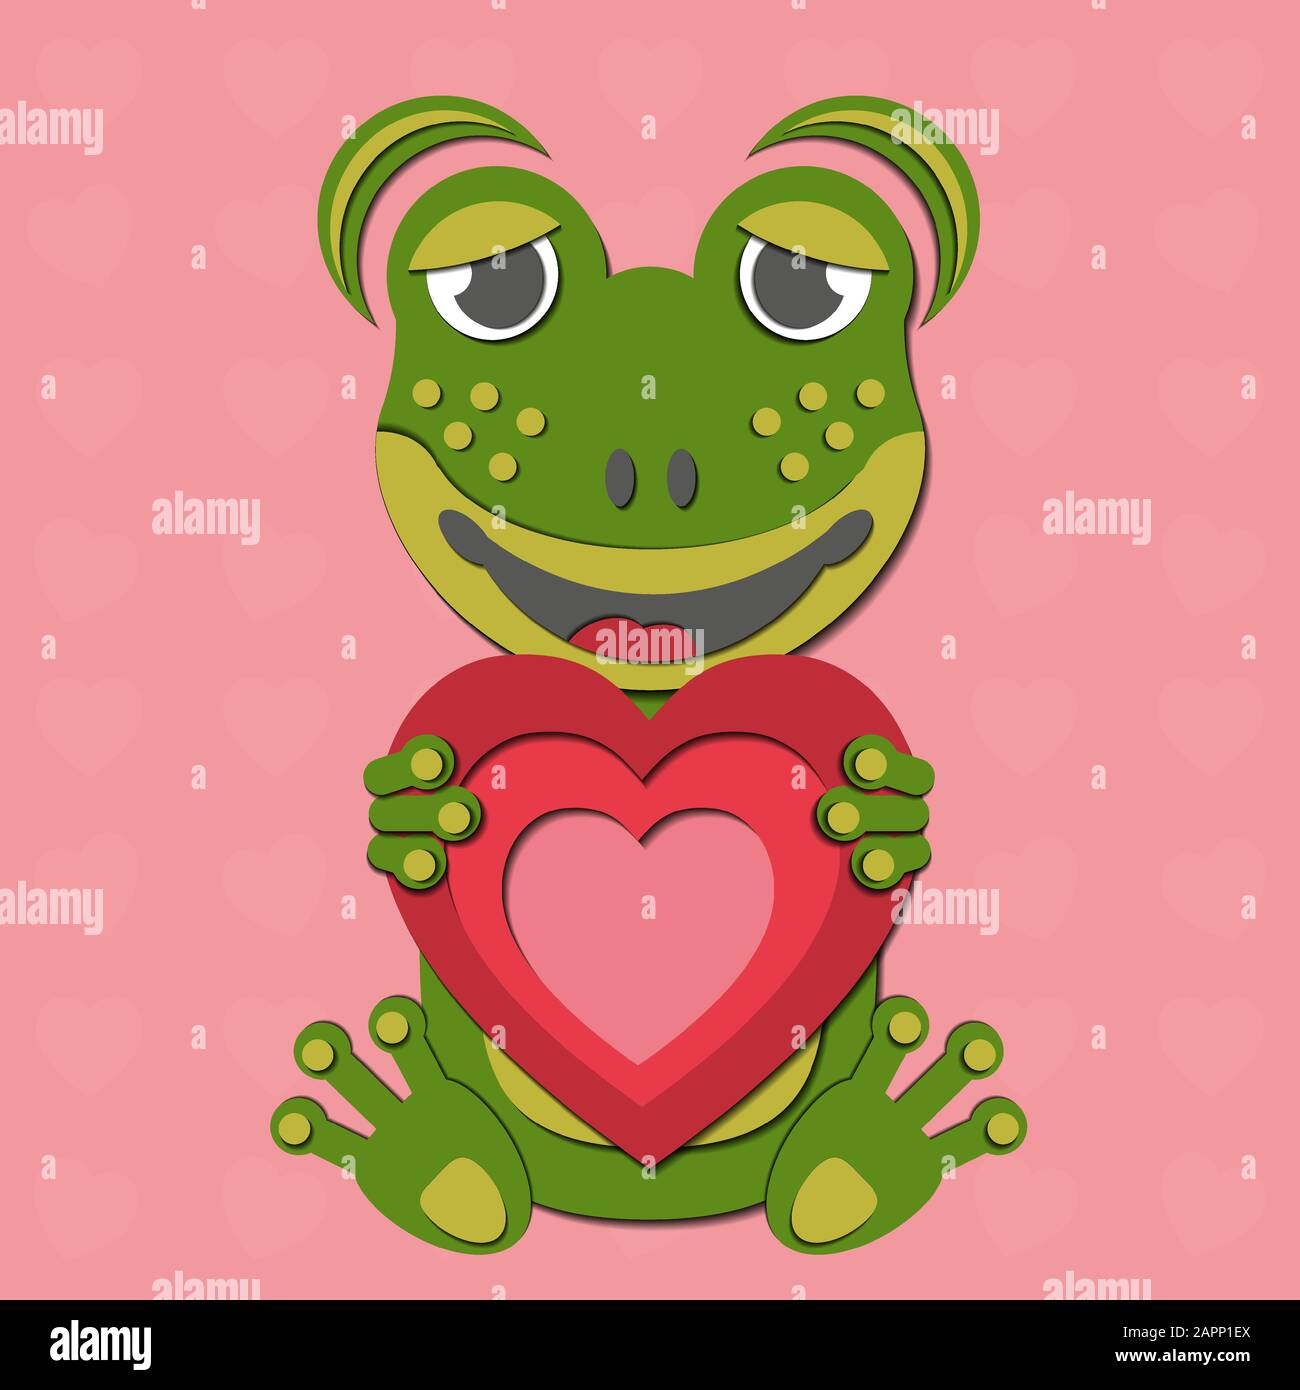 A Valentine's Day vector drawing of a cute paper cut out frog holding a red heart in its paws. The animal is green on a pink background. Stock Vector